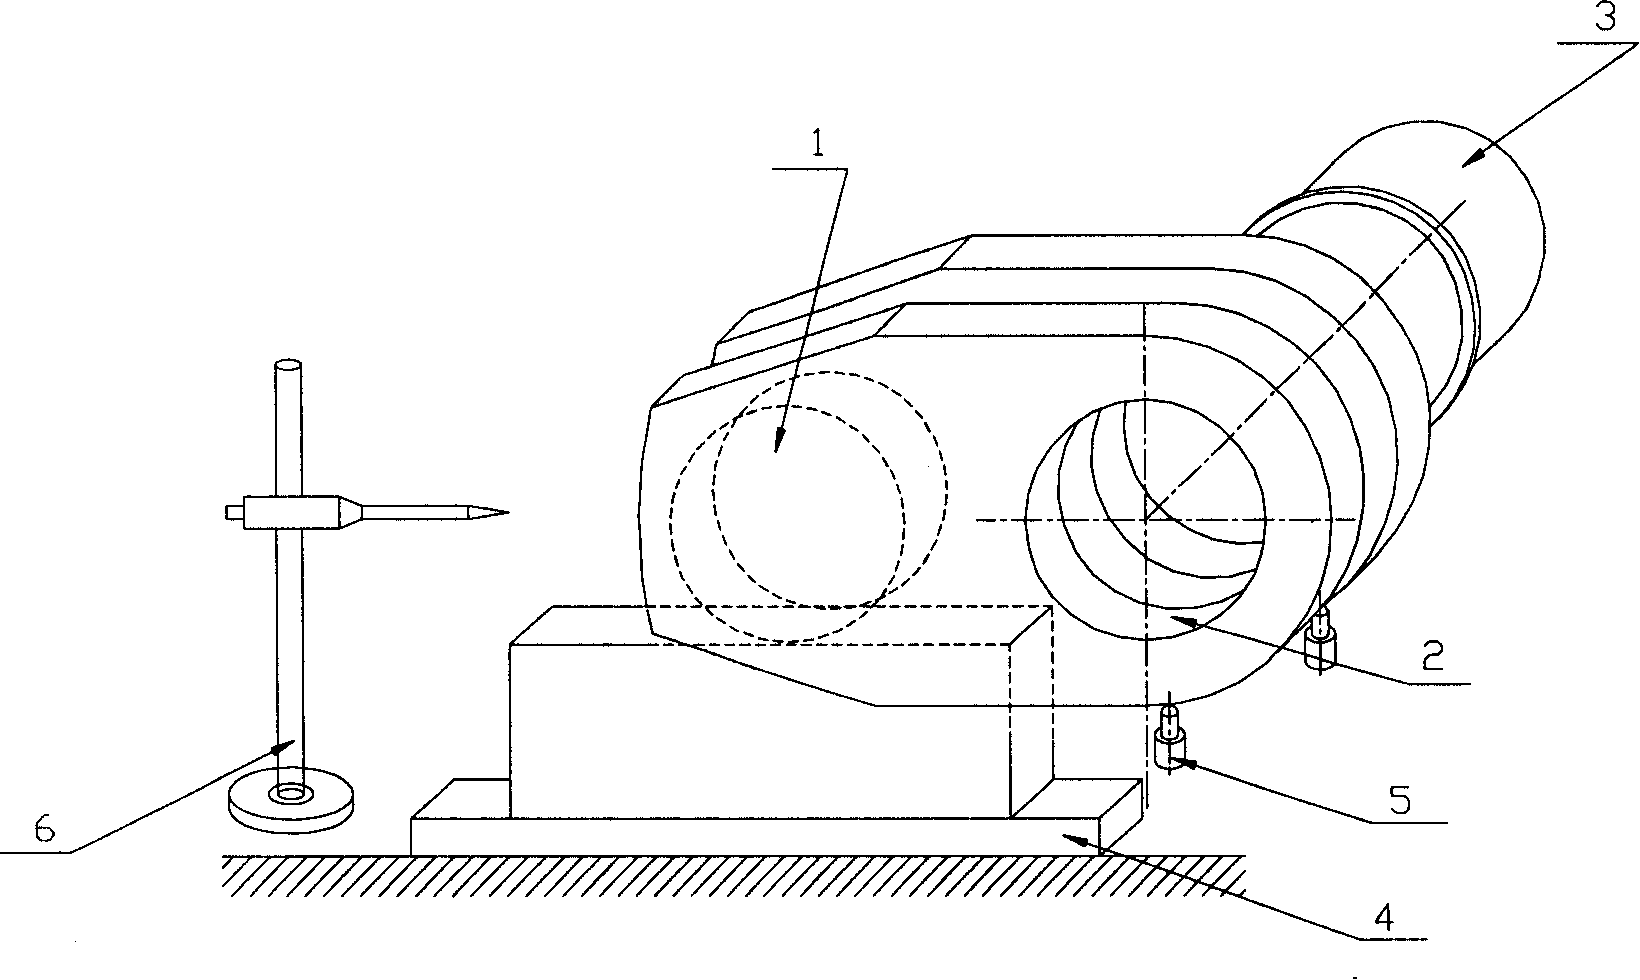 Crank pin angle control method for machining crankshaft sleeve of low-speed diesel engine for large-scale ship